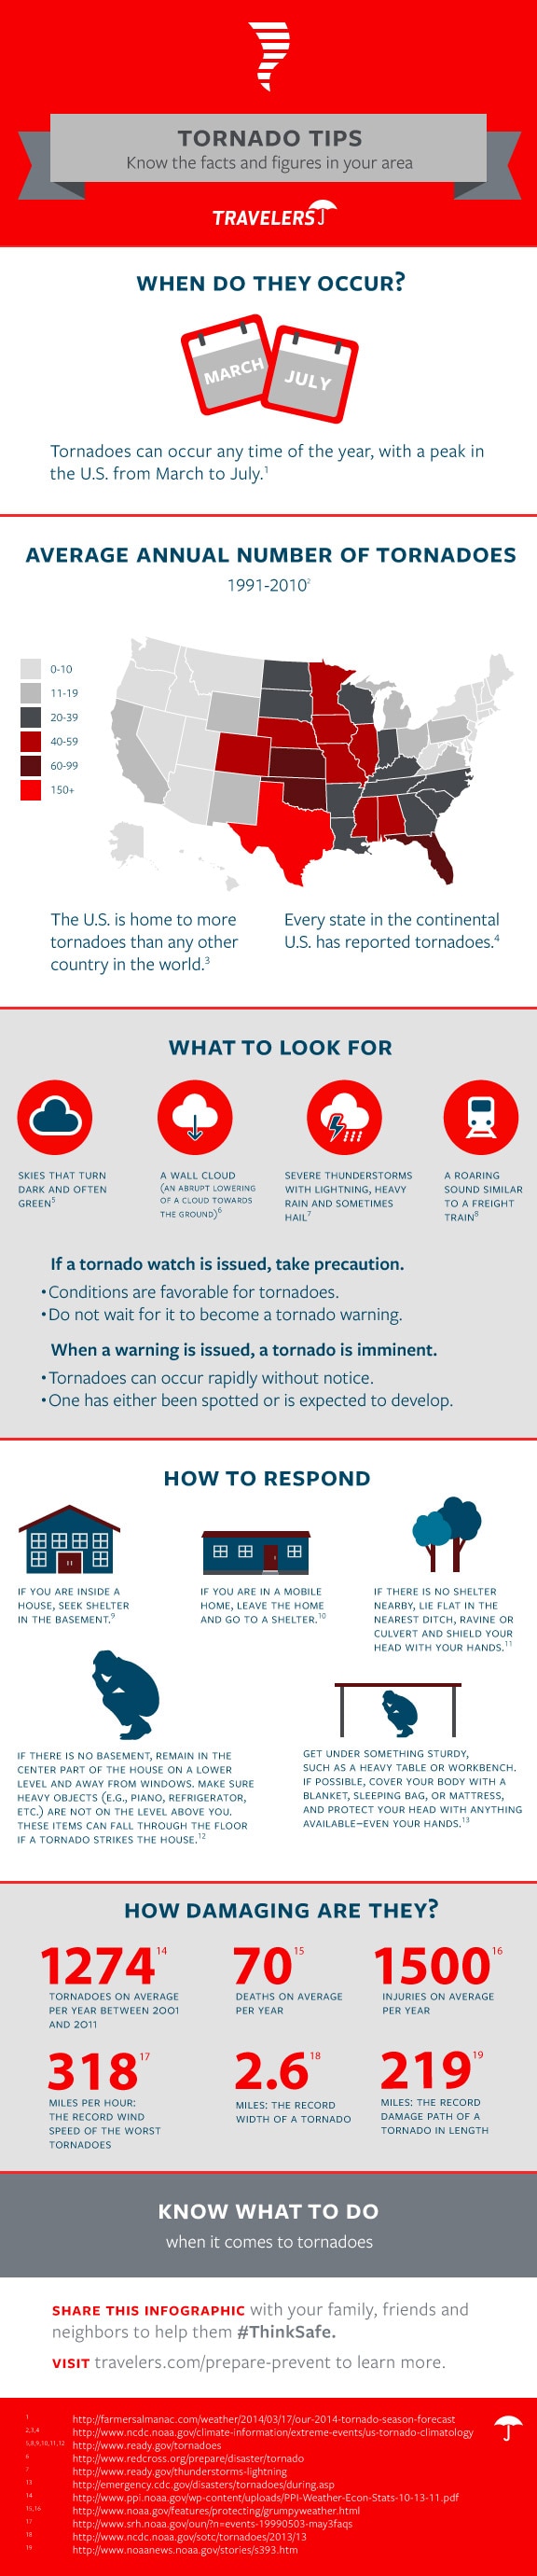 https://www.travelers.com/iw-images/resources/Weather/Large/tornado_tips_infographic.jpg